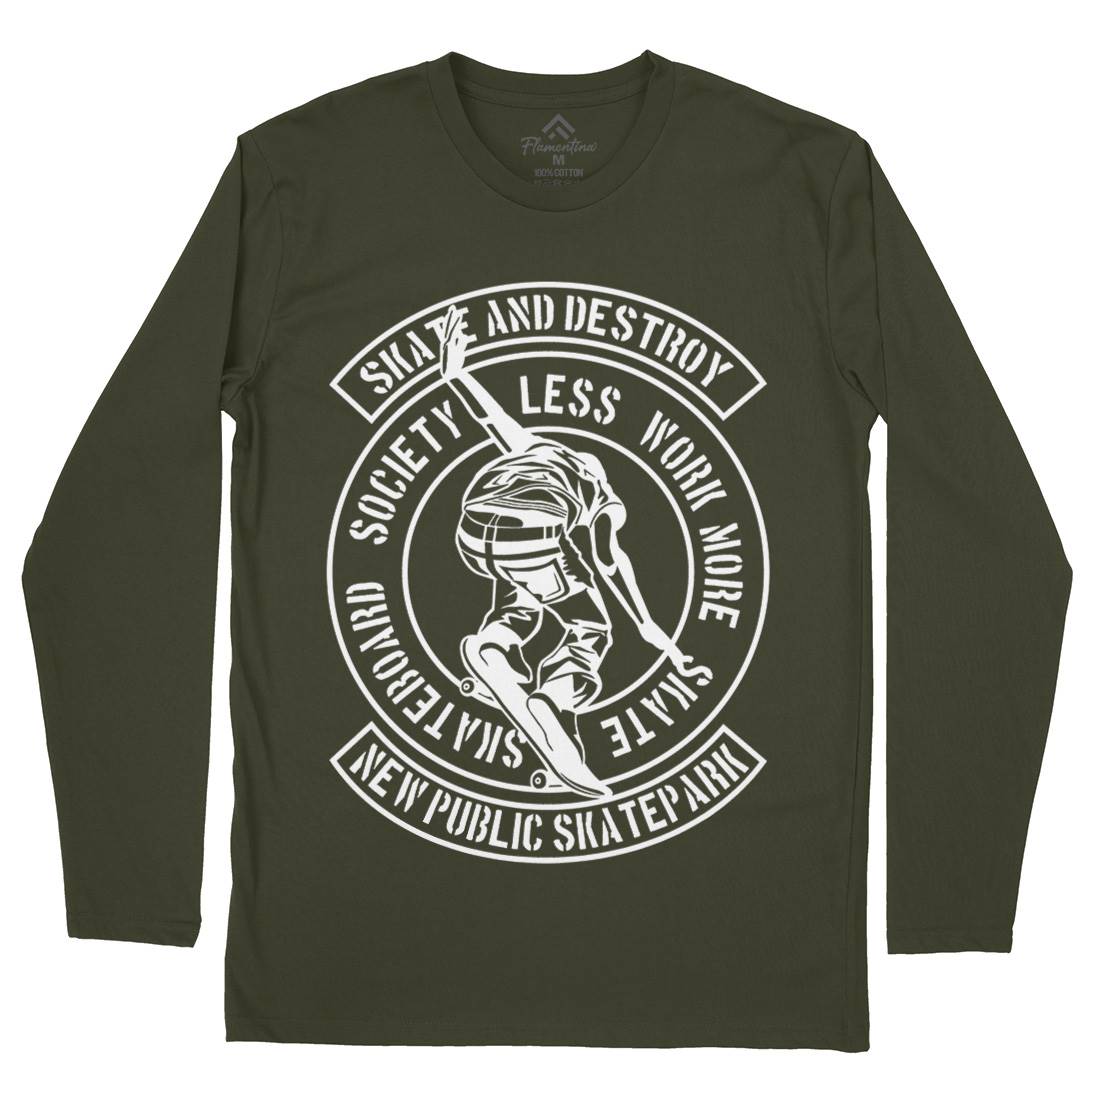 And Destroy Mens Long Sleeve T-Shirt Skate A142